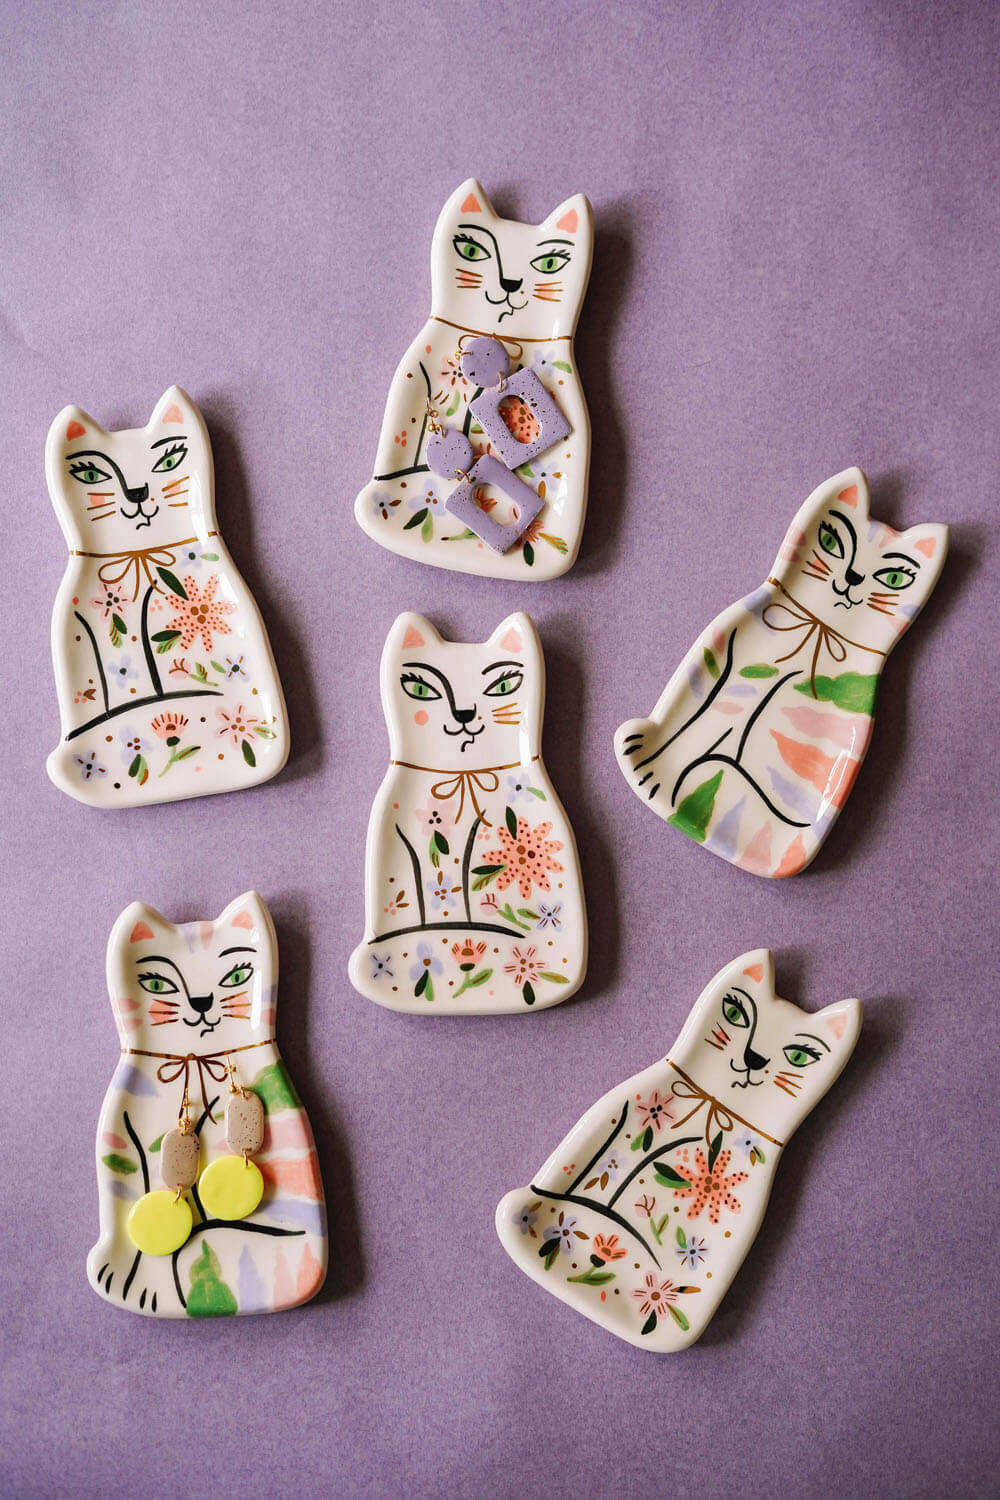 ceramic cat jewelry dishes - the cutest gift for cat lovers!